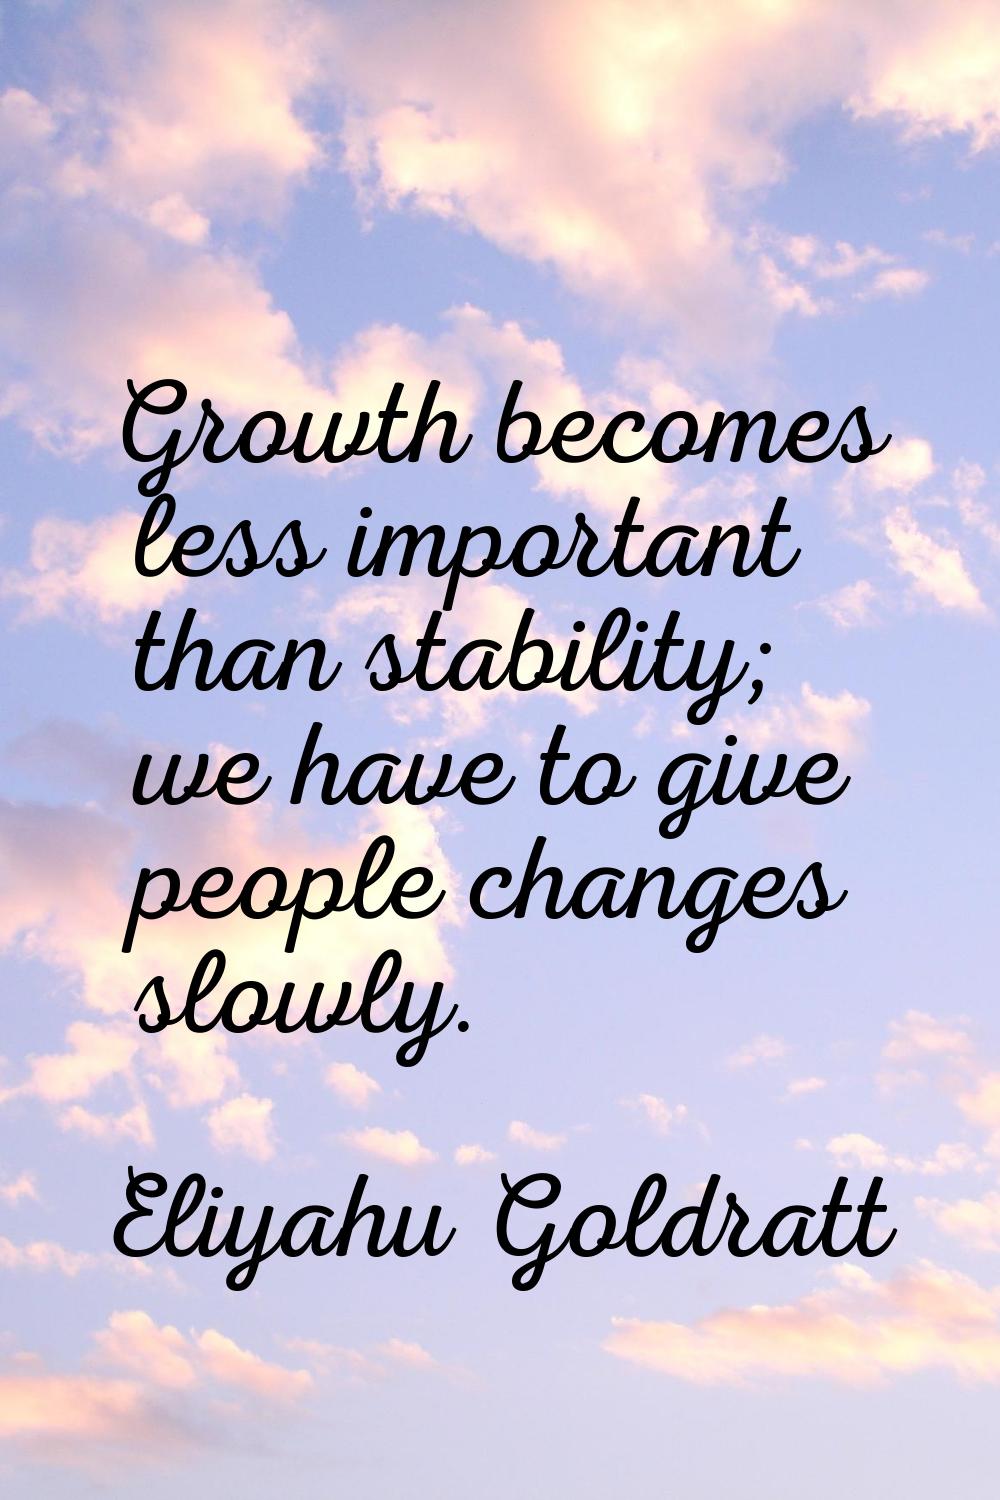 Growth becomes less important than stability; we have to give people changes slowly.